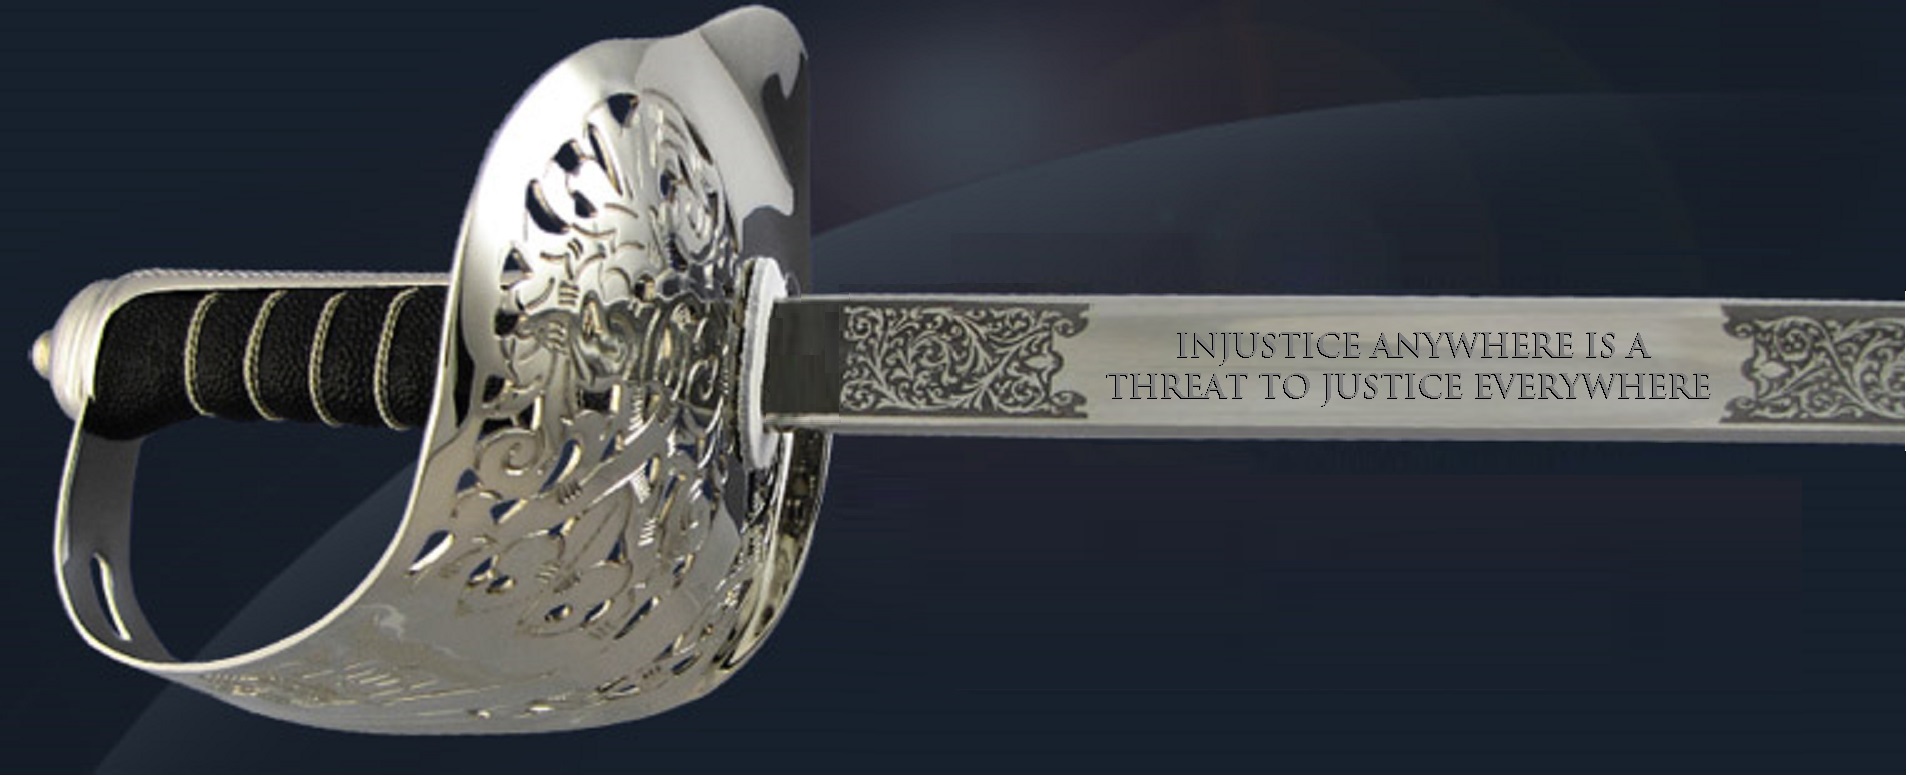 Sword engraved A threat to justice anywhere is a threat to justice everywhere